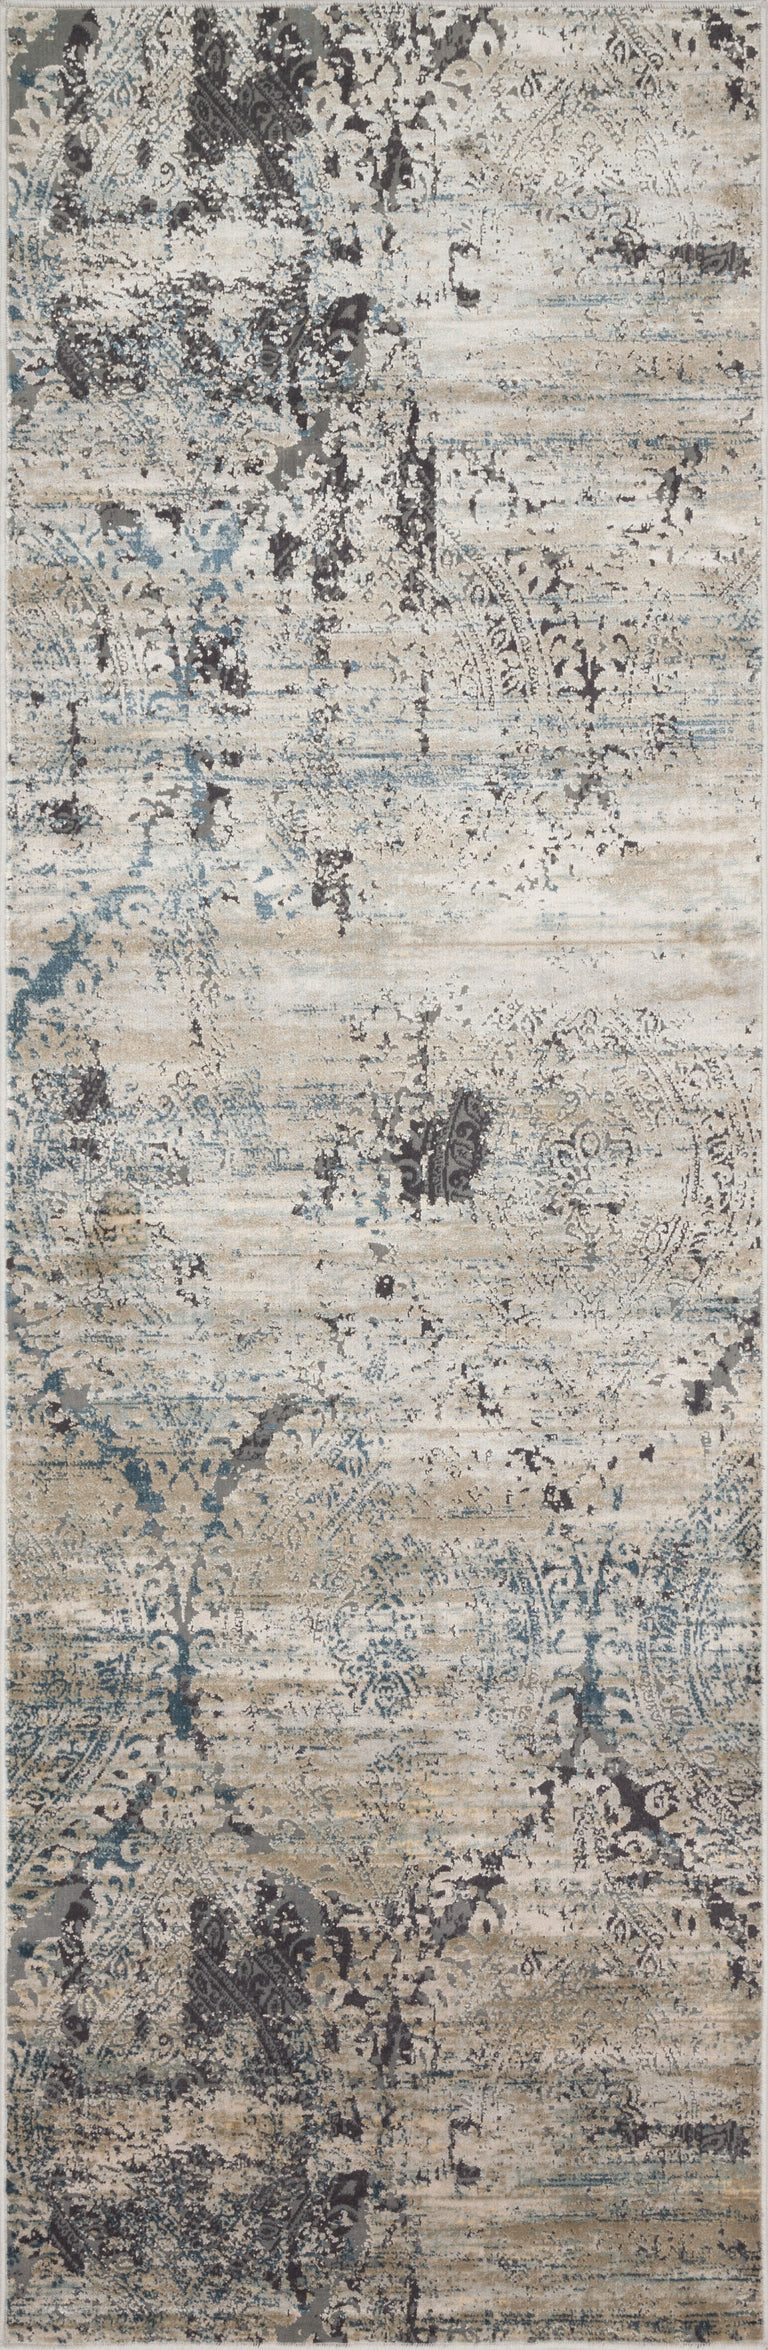 Loloi Rugs Cascade Collection Rug in Taupe, Blue - 12'0" x 15'0"